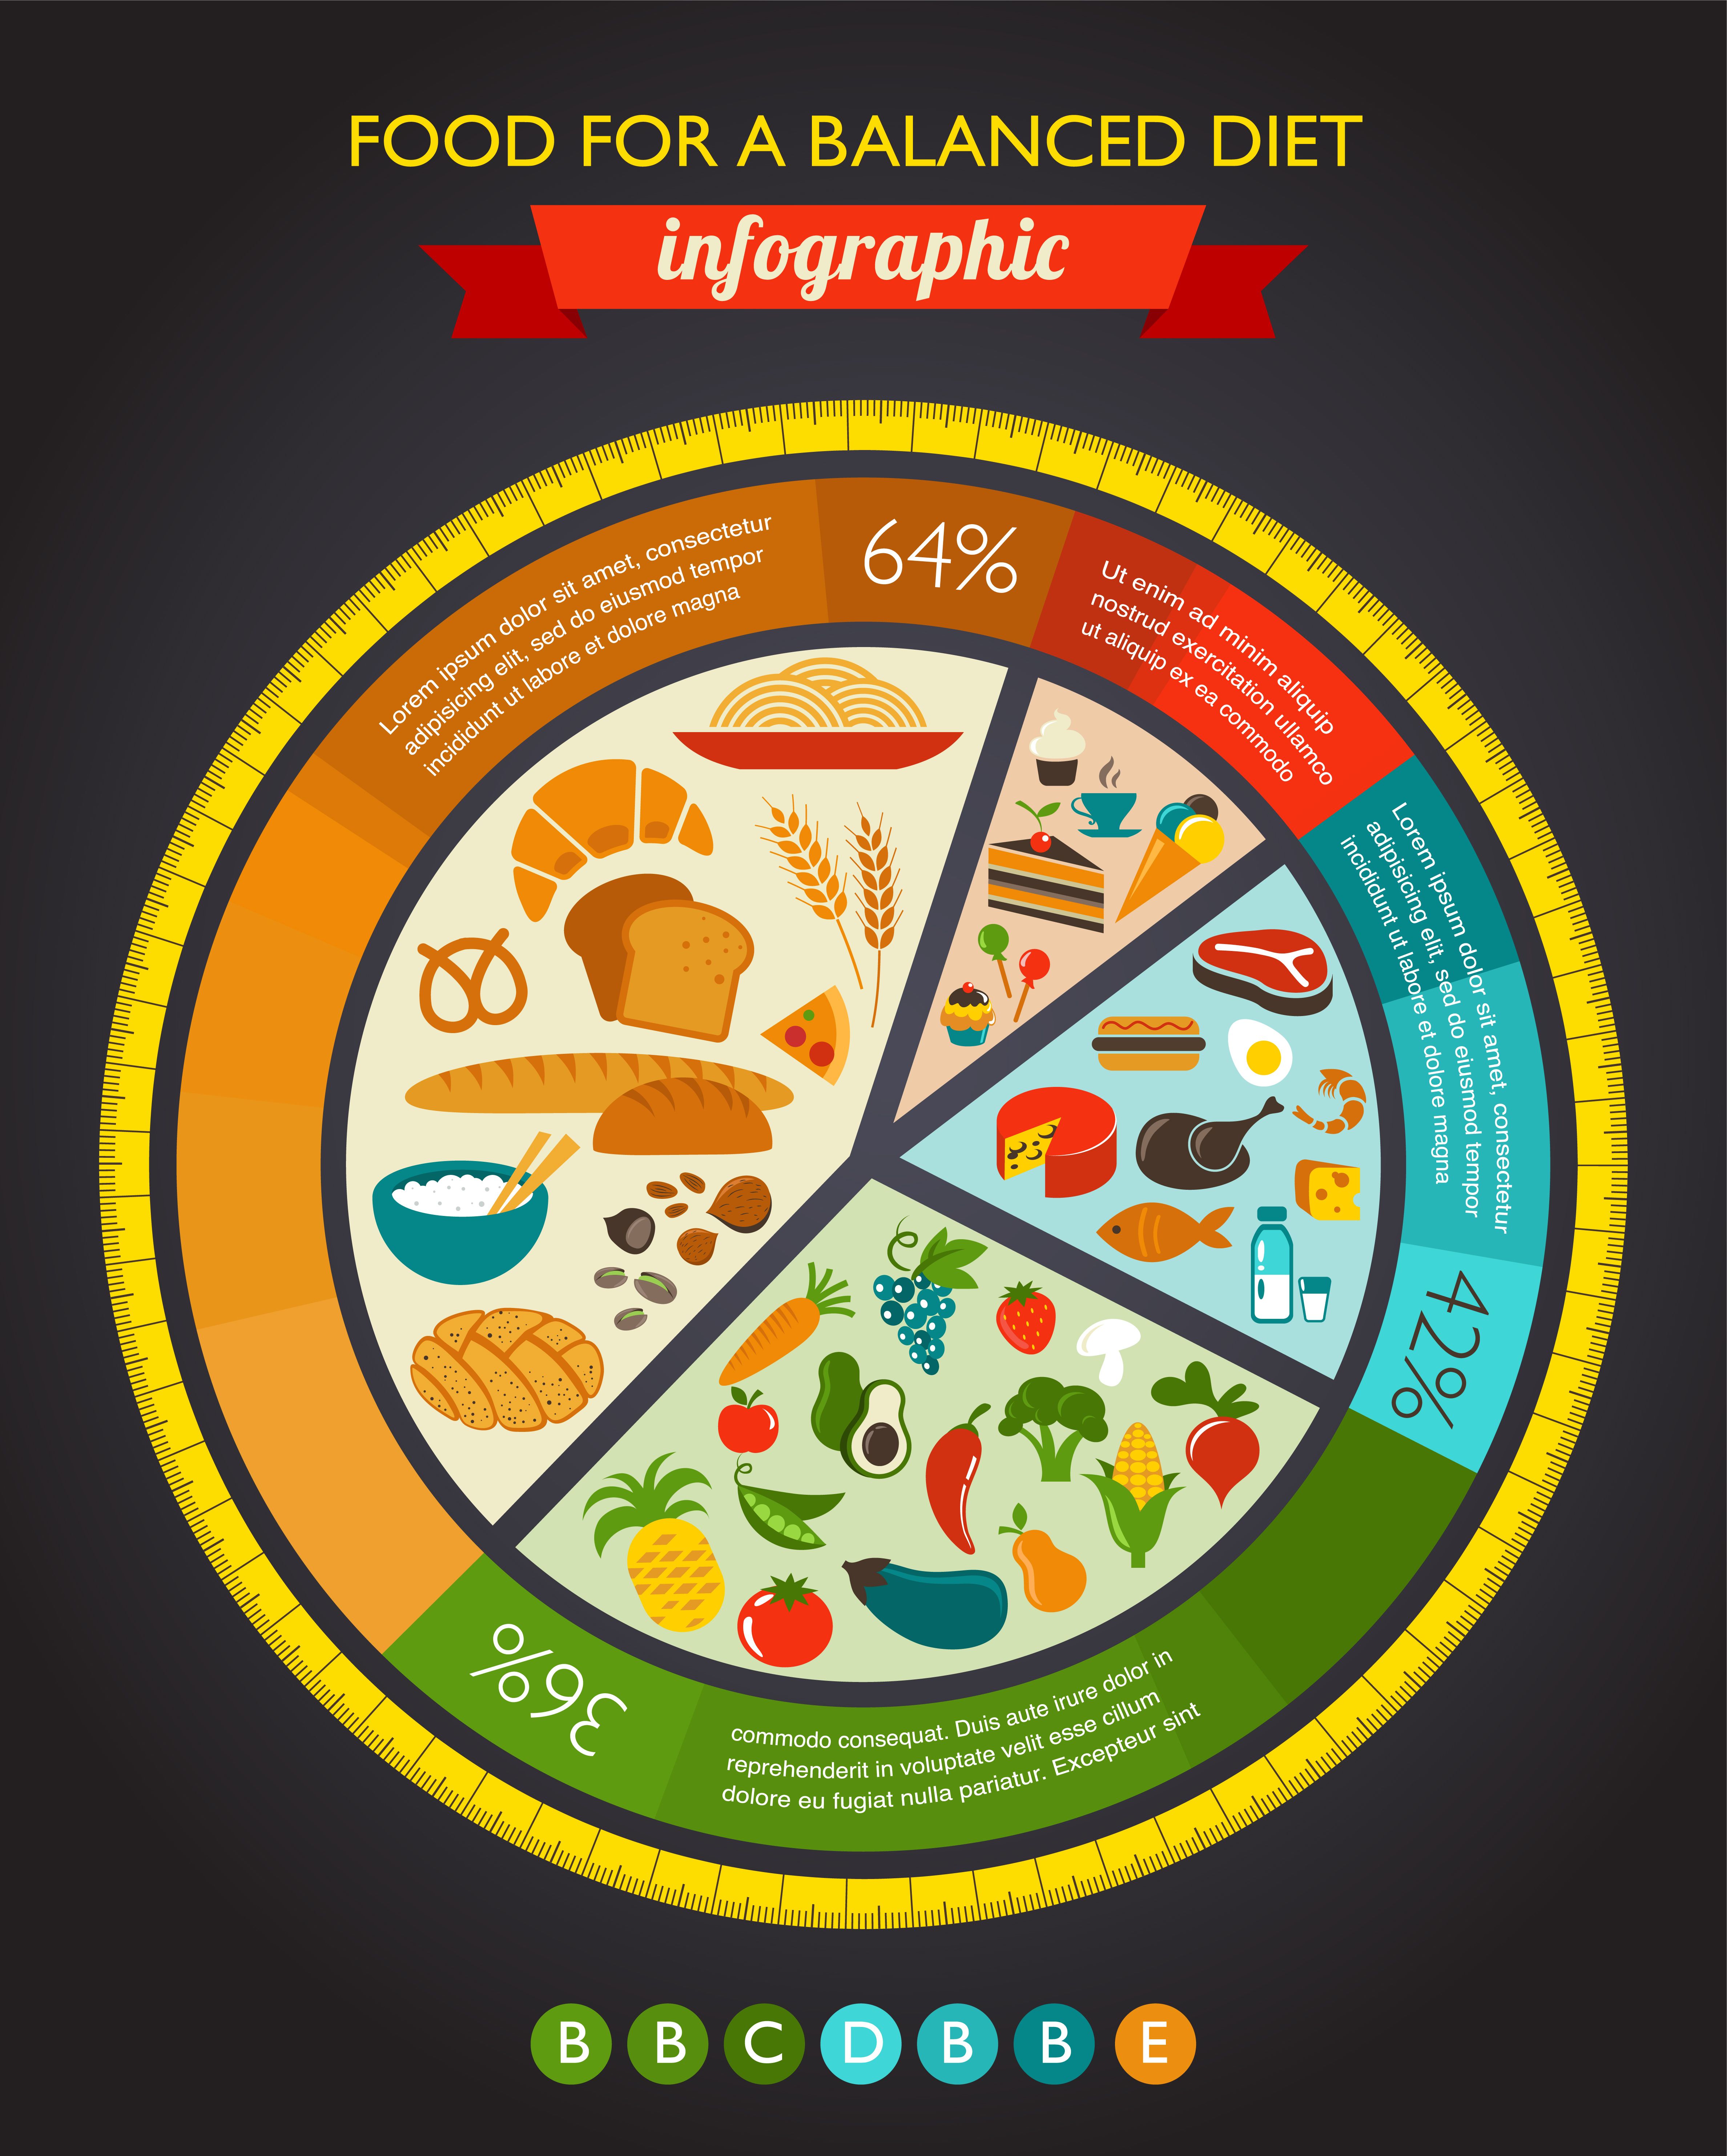 Balanced diet chart to encourage young kids to eat healthy